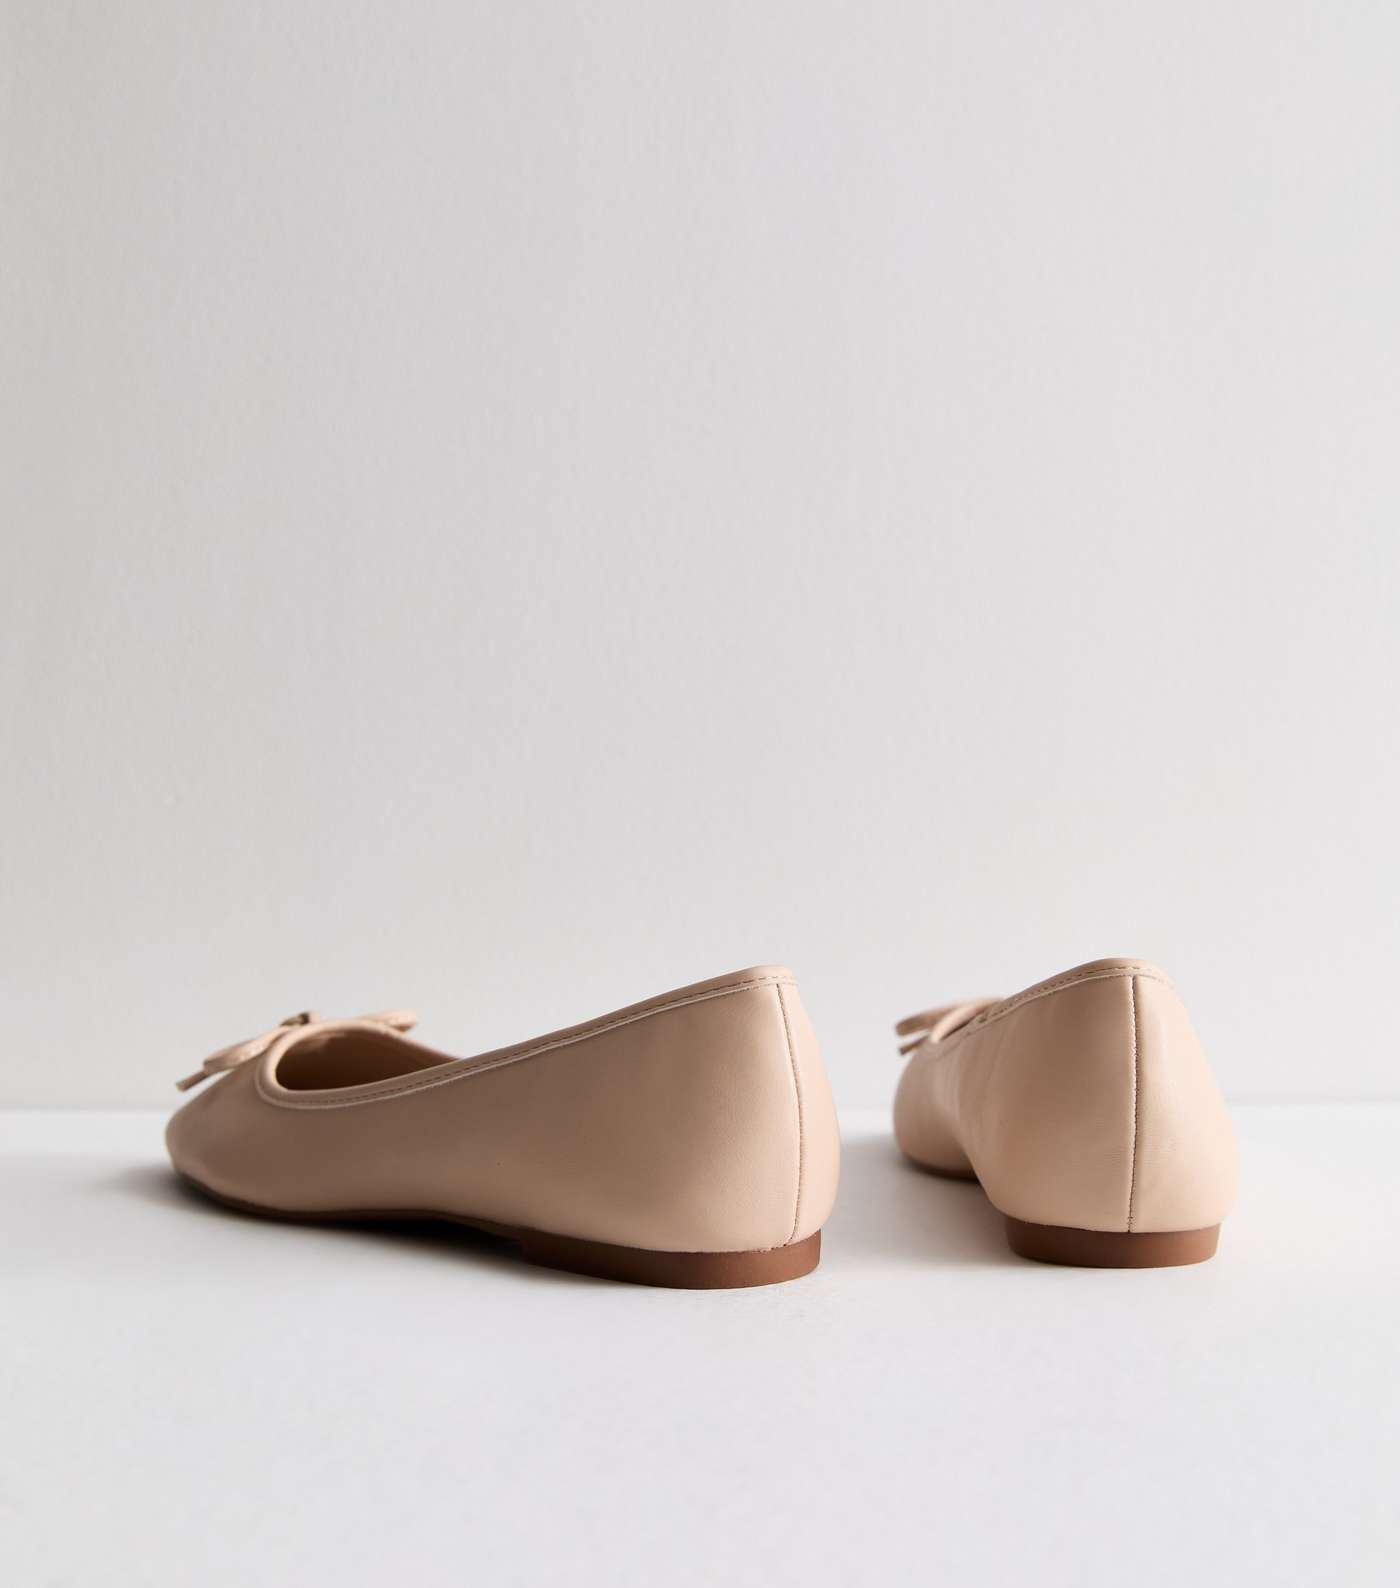 Truffle Pale Pink Leather-Look Bow Ballerina Pumps Image 4